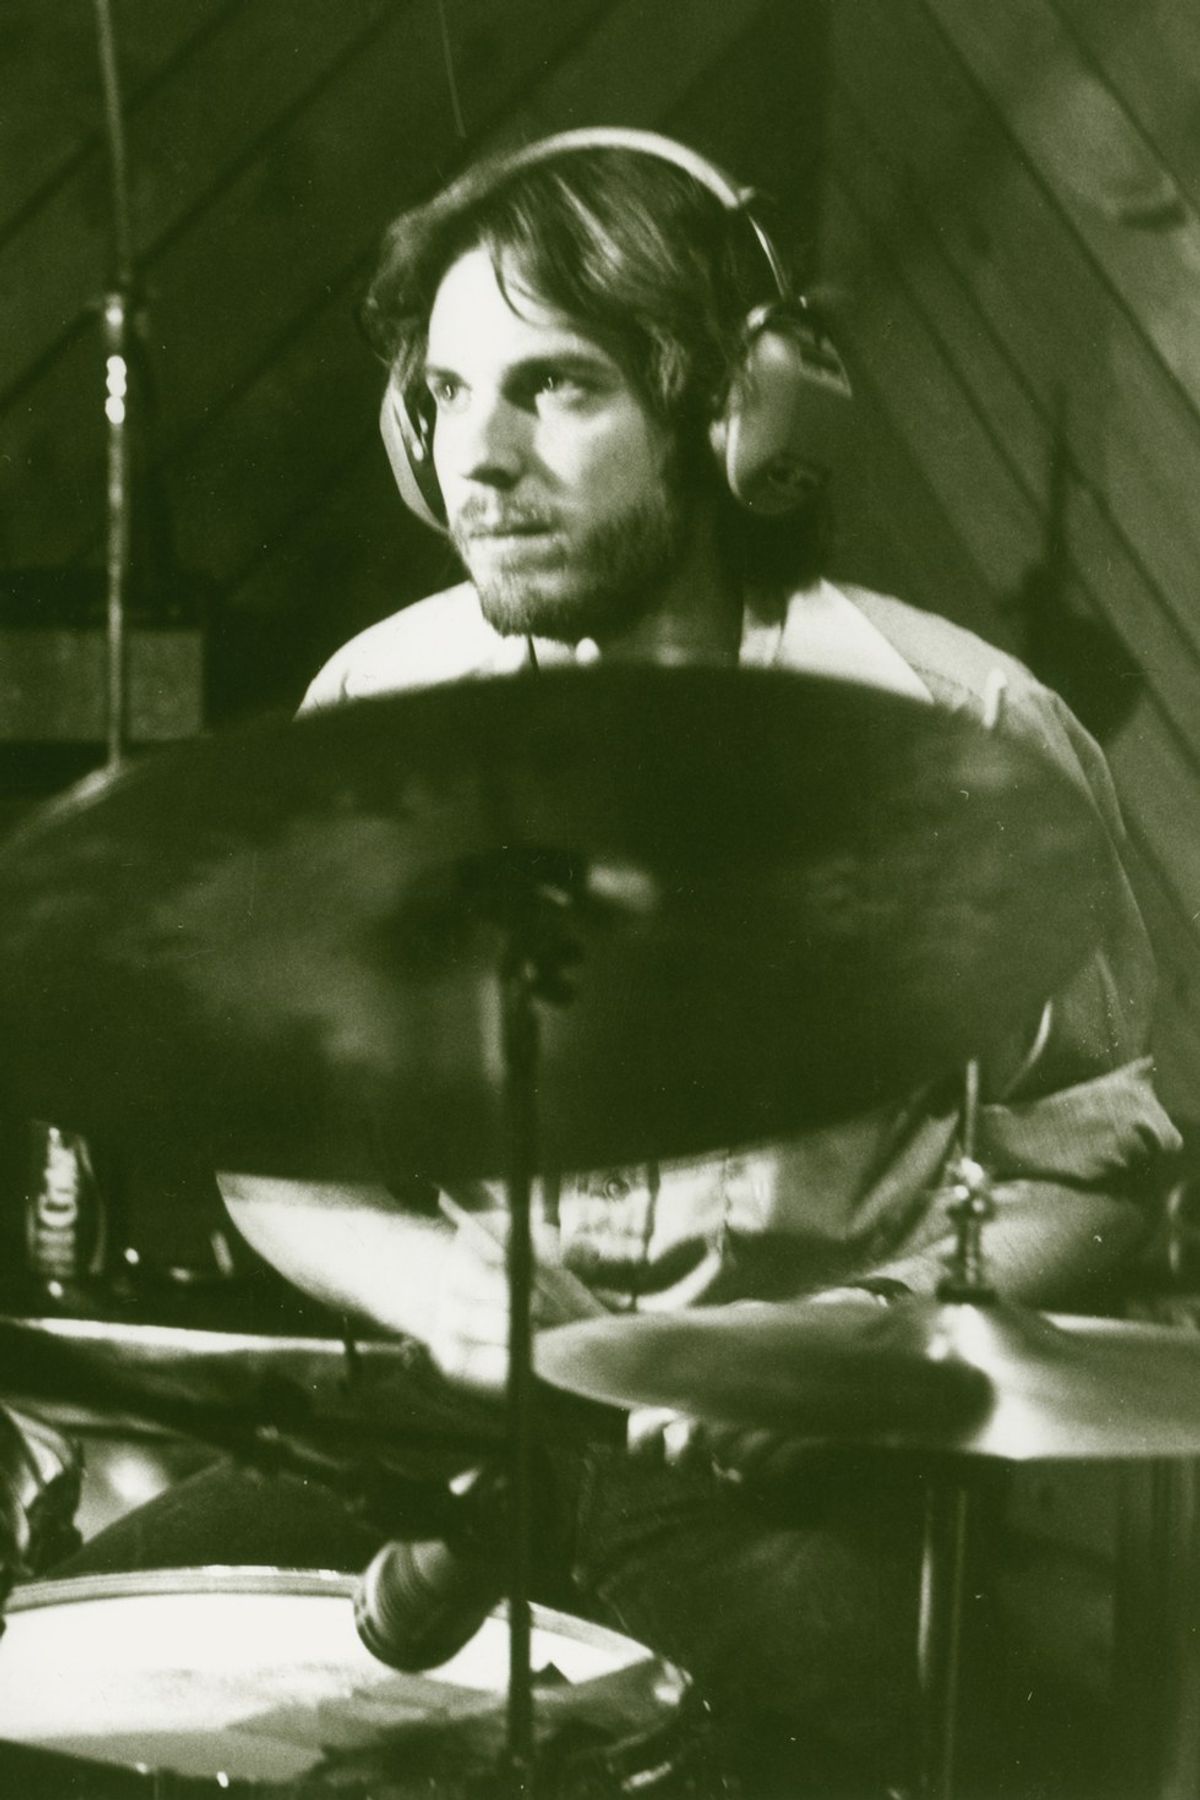 A Tribute To My Dad, Chuck Sullivan, The Drummer